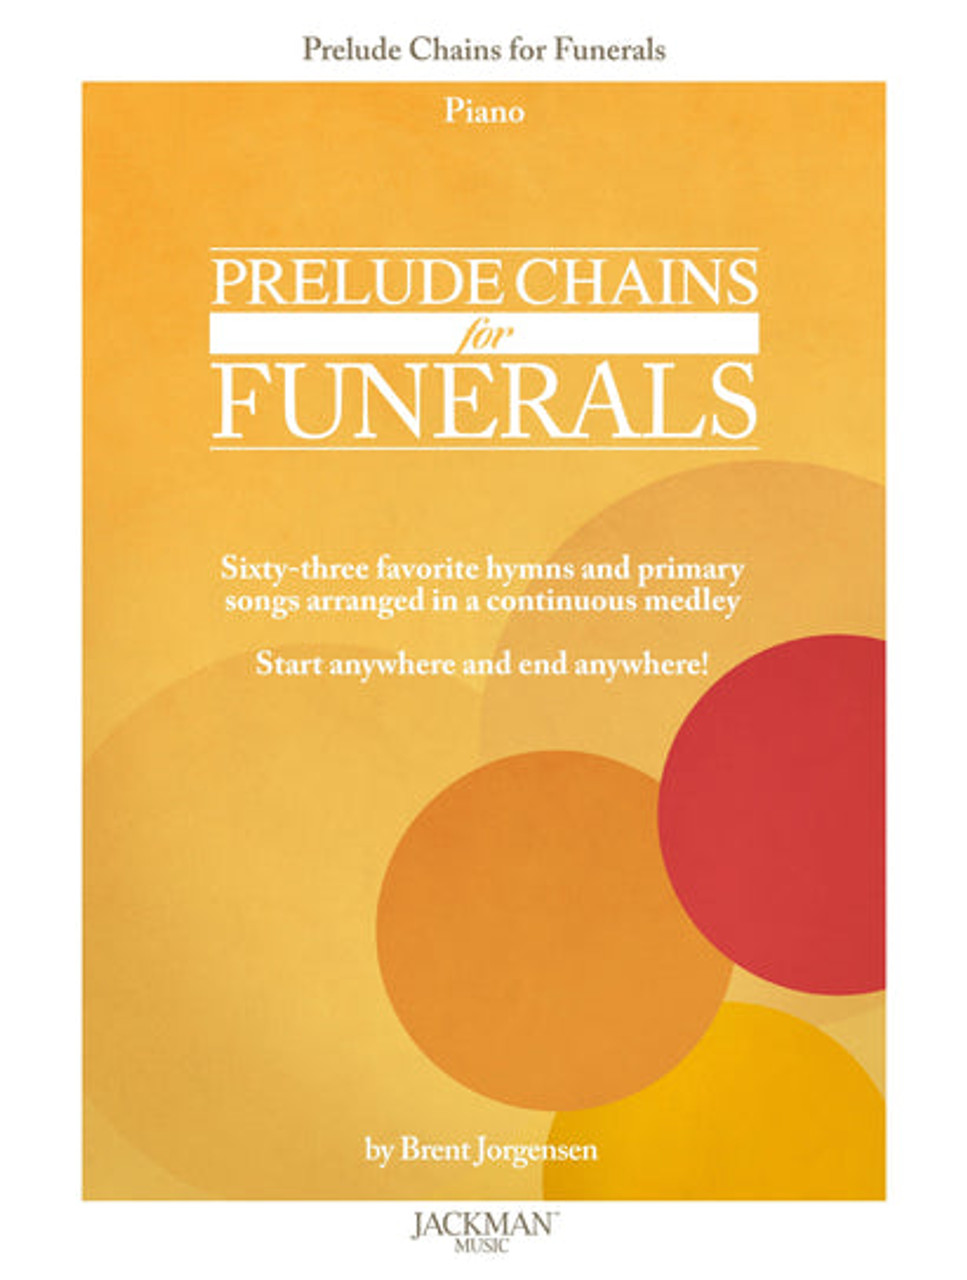 Prelude Chains for Funerals - Piano